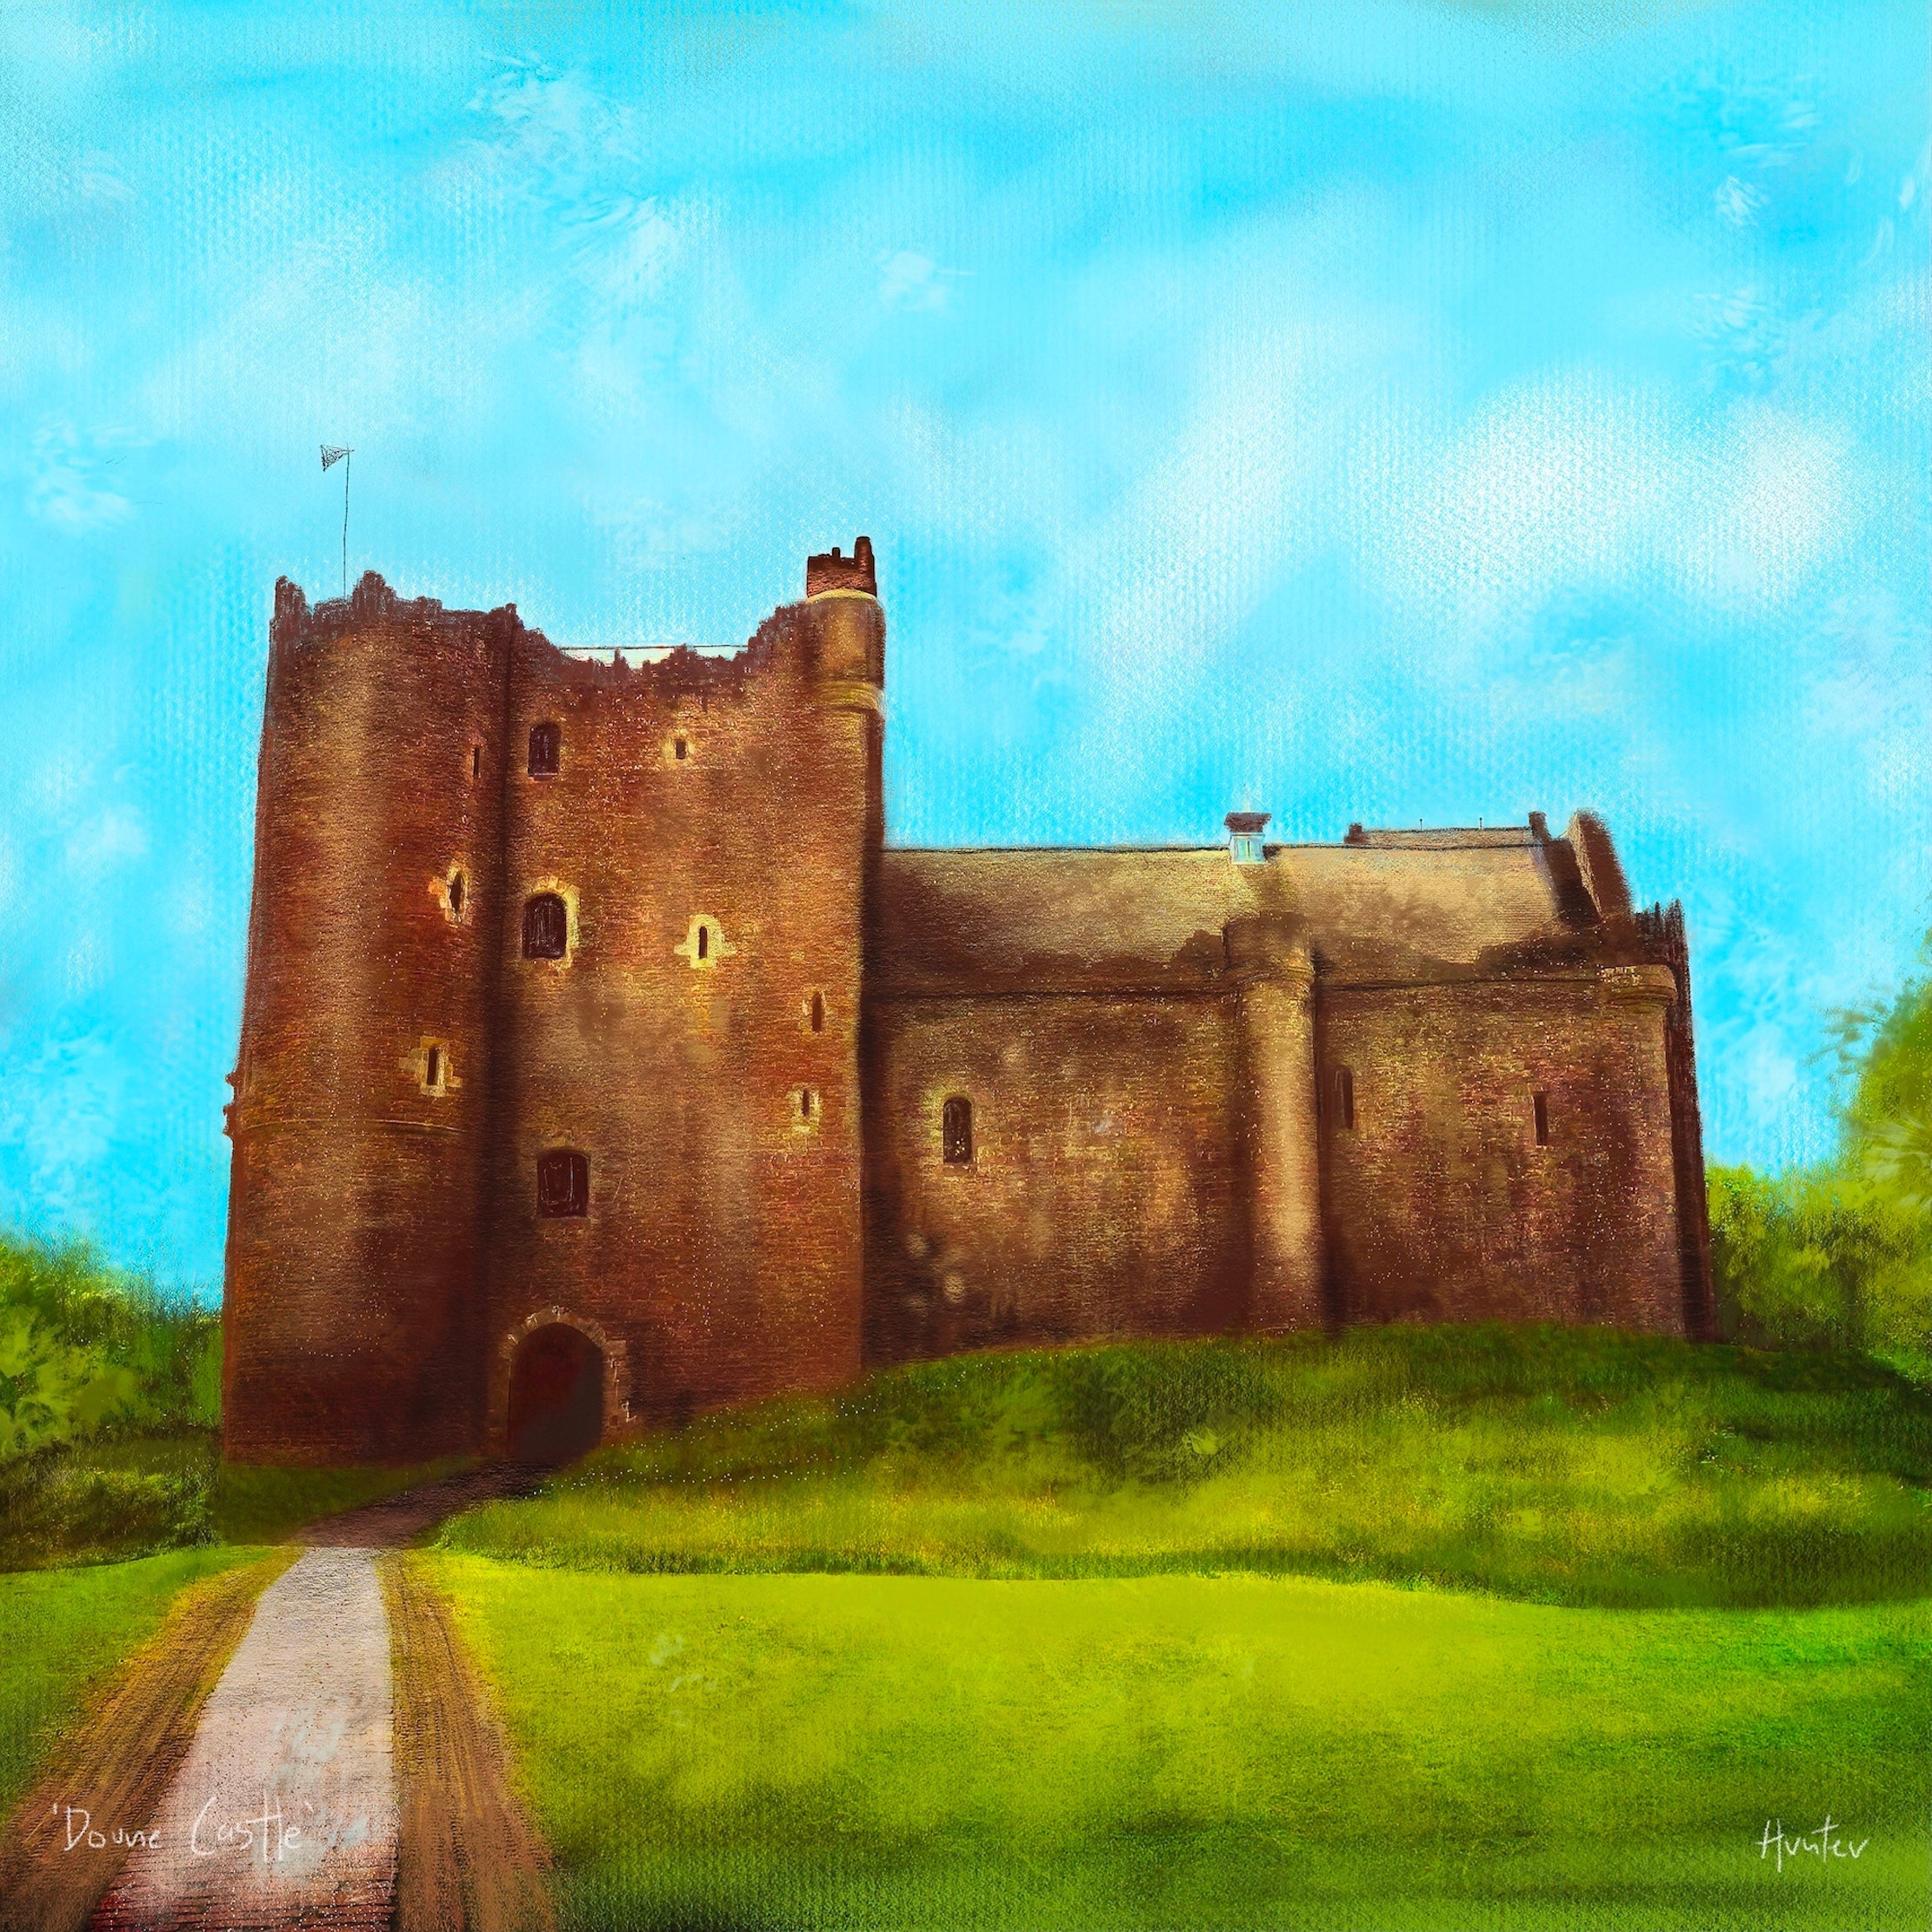 Doune Castle | Scotland In Your Pocket Art Print-Scotland In Your Pocket Framed Prints-Historic & Iconic Scotland Art Gallery-Paintings, Prints, Homeware, Art Gifts From Scotland By Scottish Artist Kevin Hunter